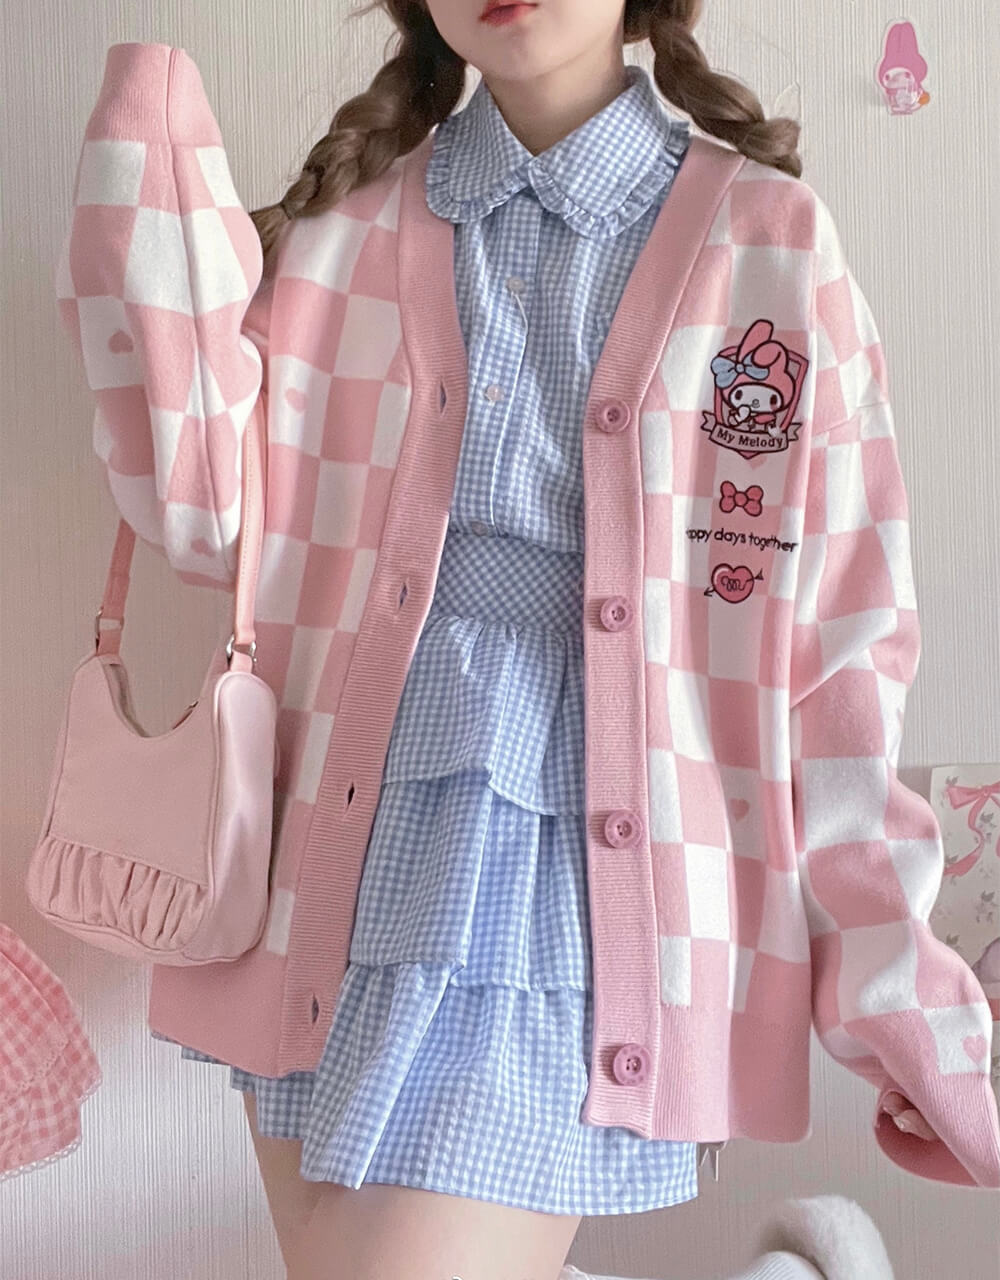 pink-sweet-outfit-styled-by-my-melody-checkered-pattern-cardigan-sweater